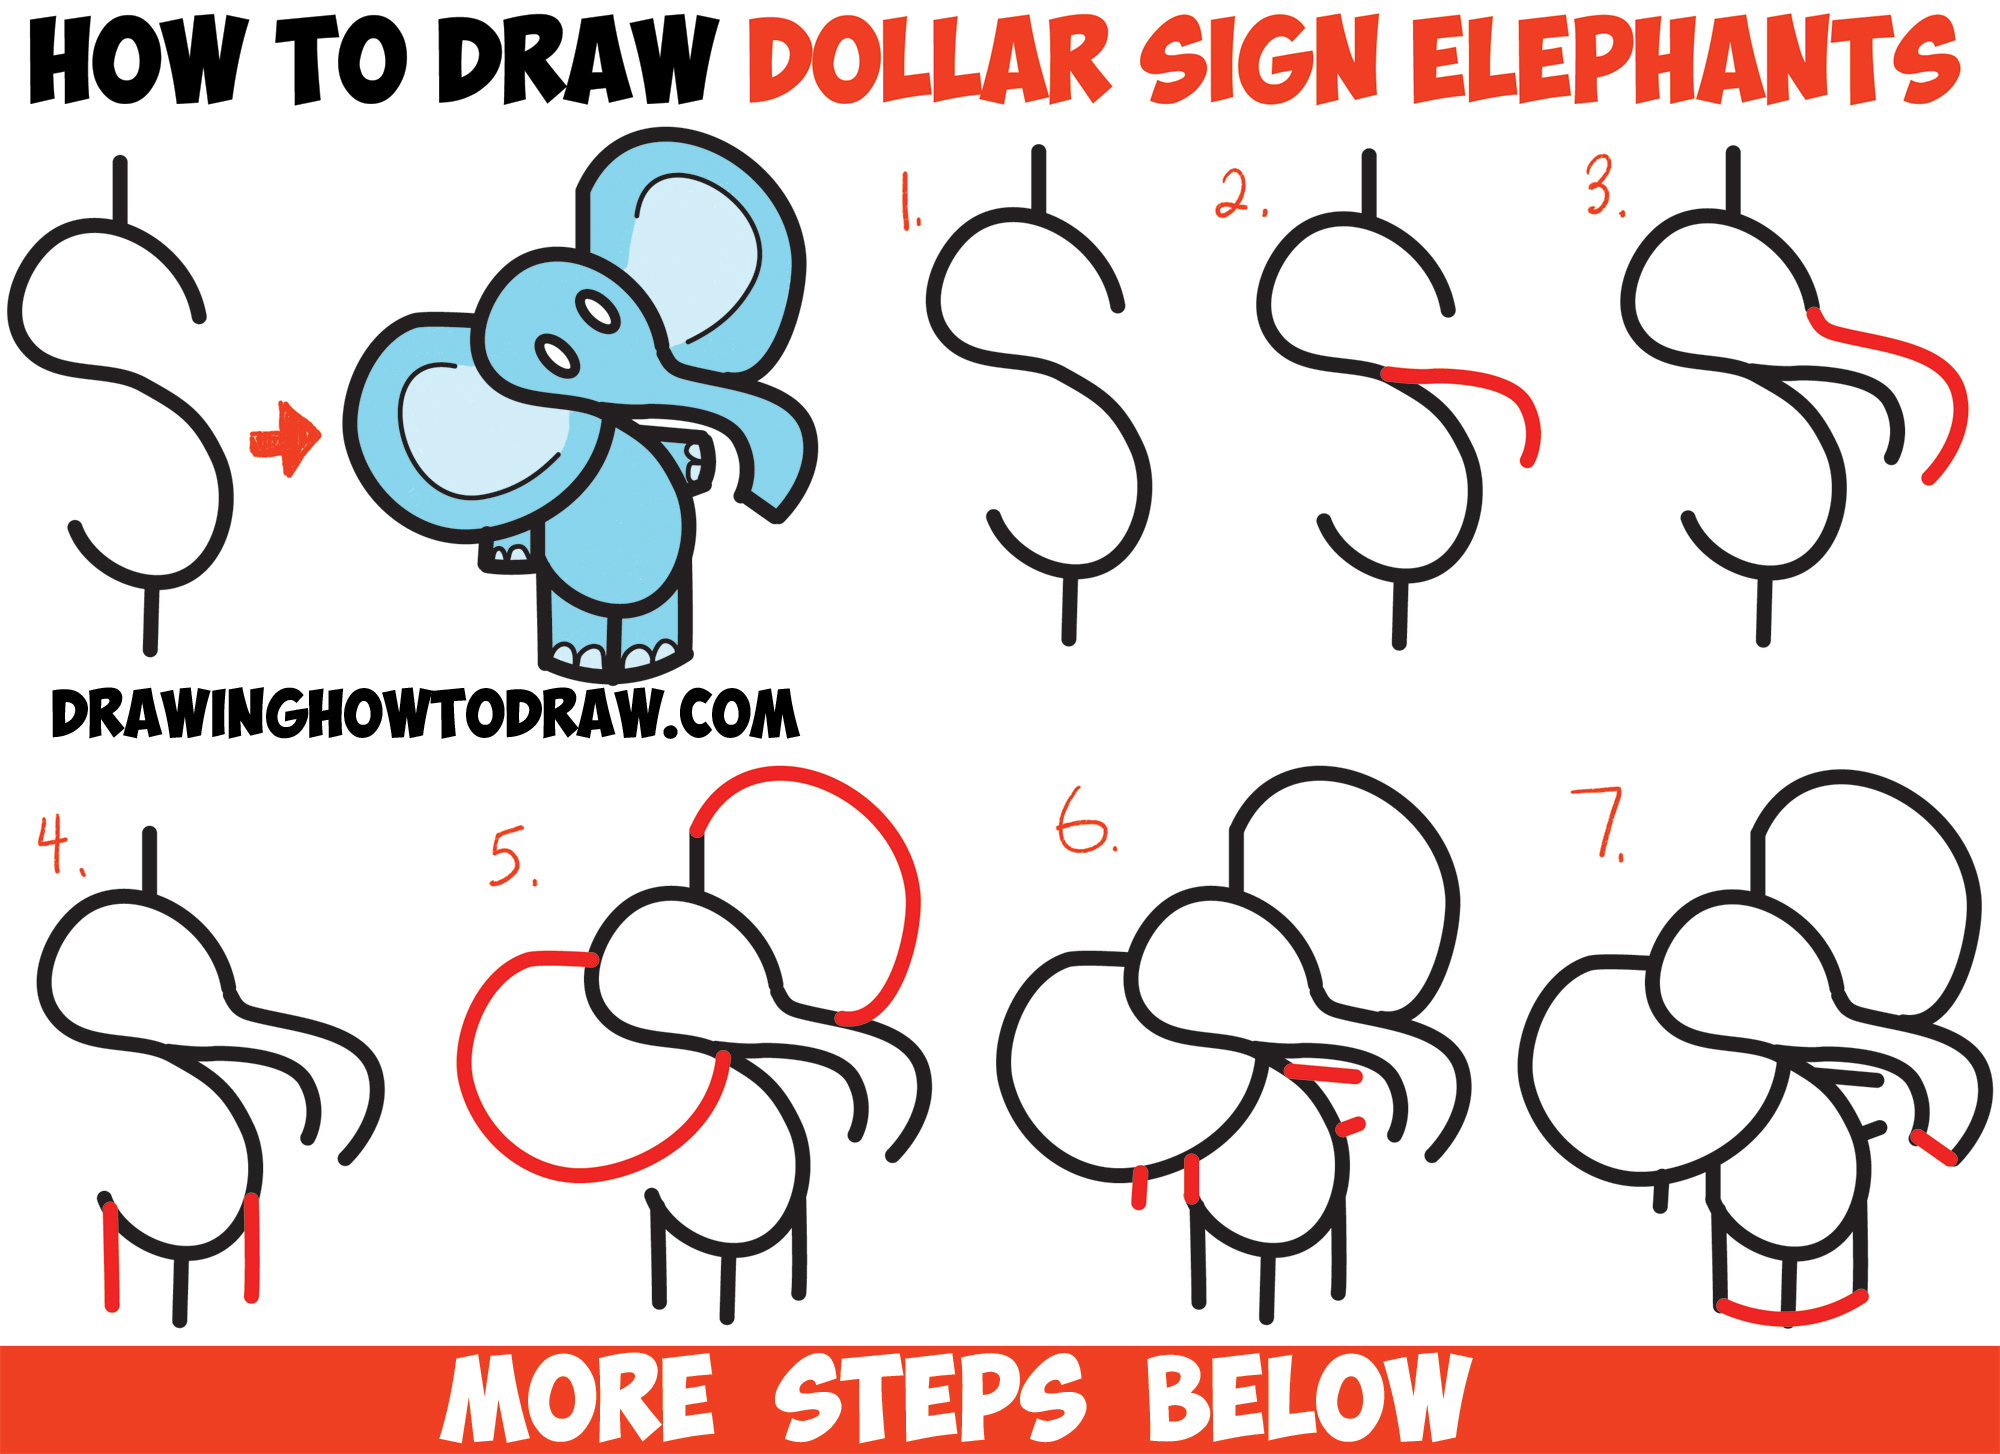 How To Draw Cartoon Elephant From The Dollar Sign Easy Step By Step Drawing Tutorial For Kids How To Draw Step By Step Drawing Tutorials